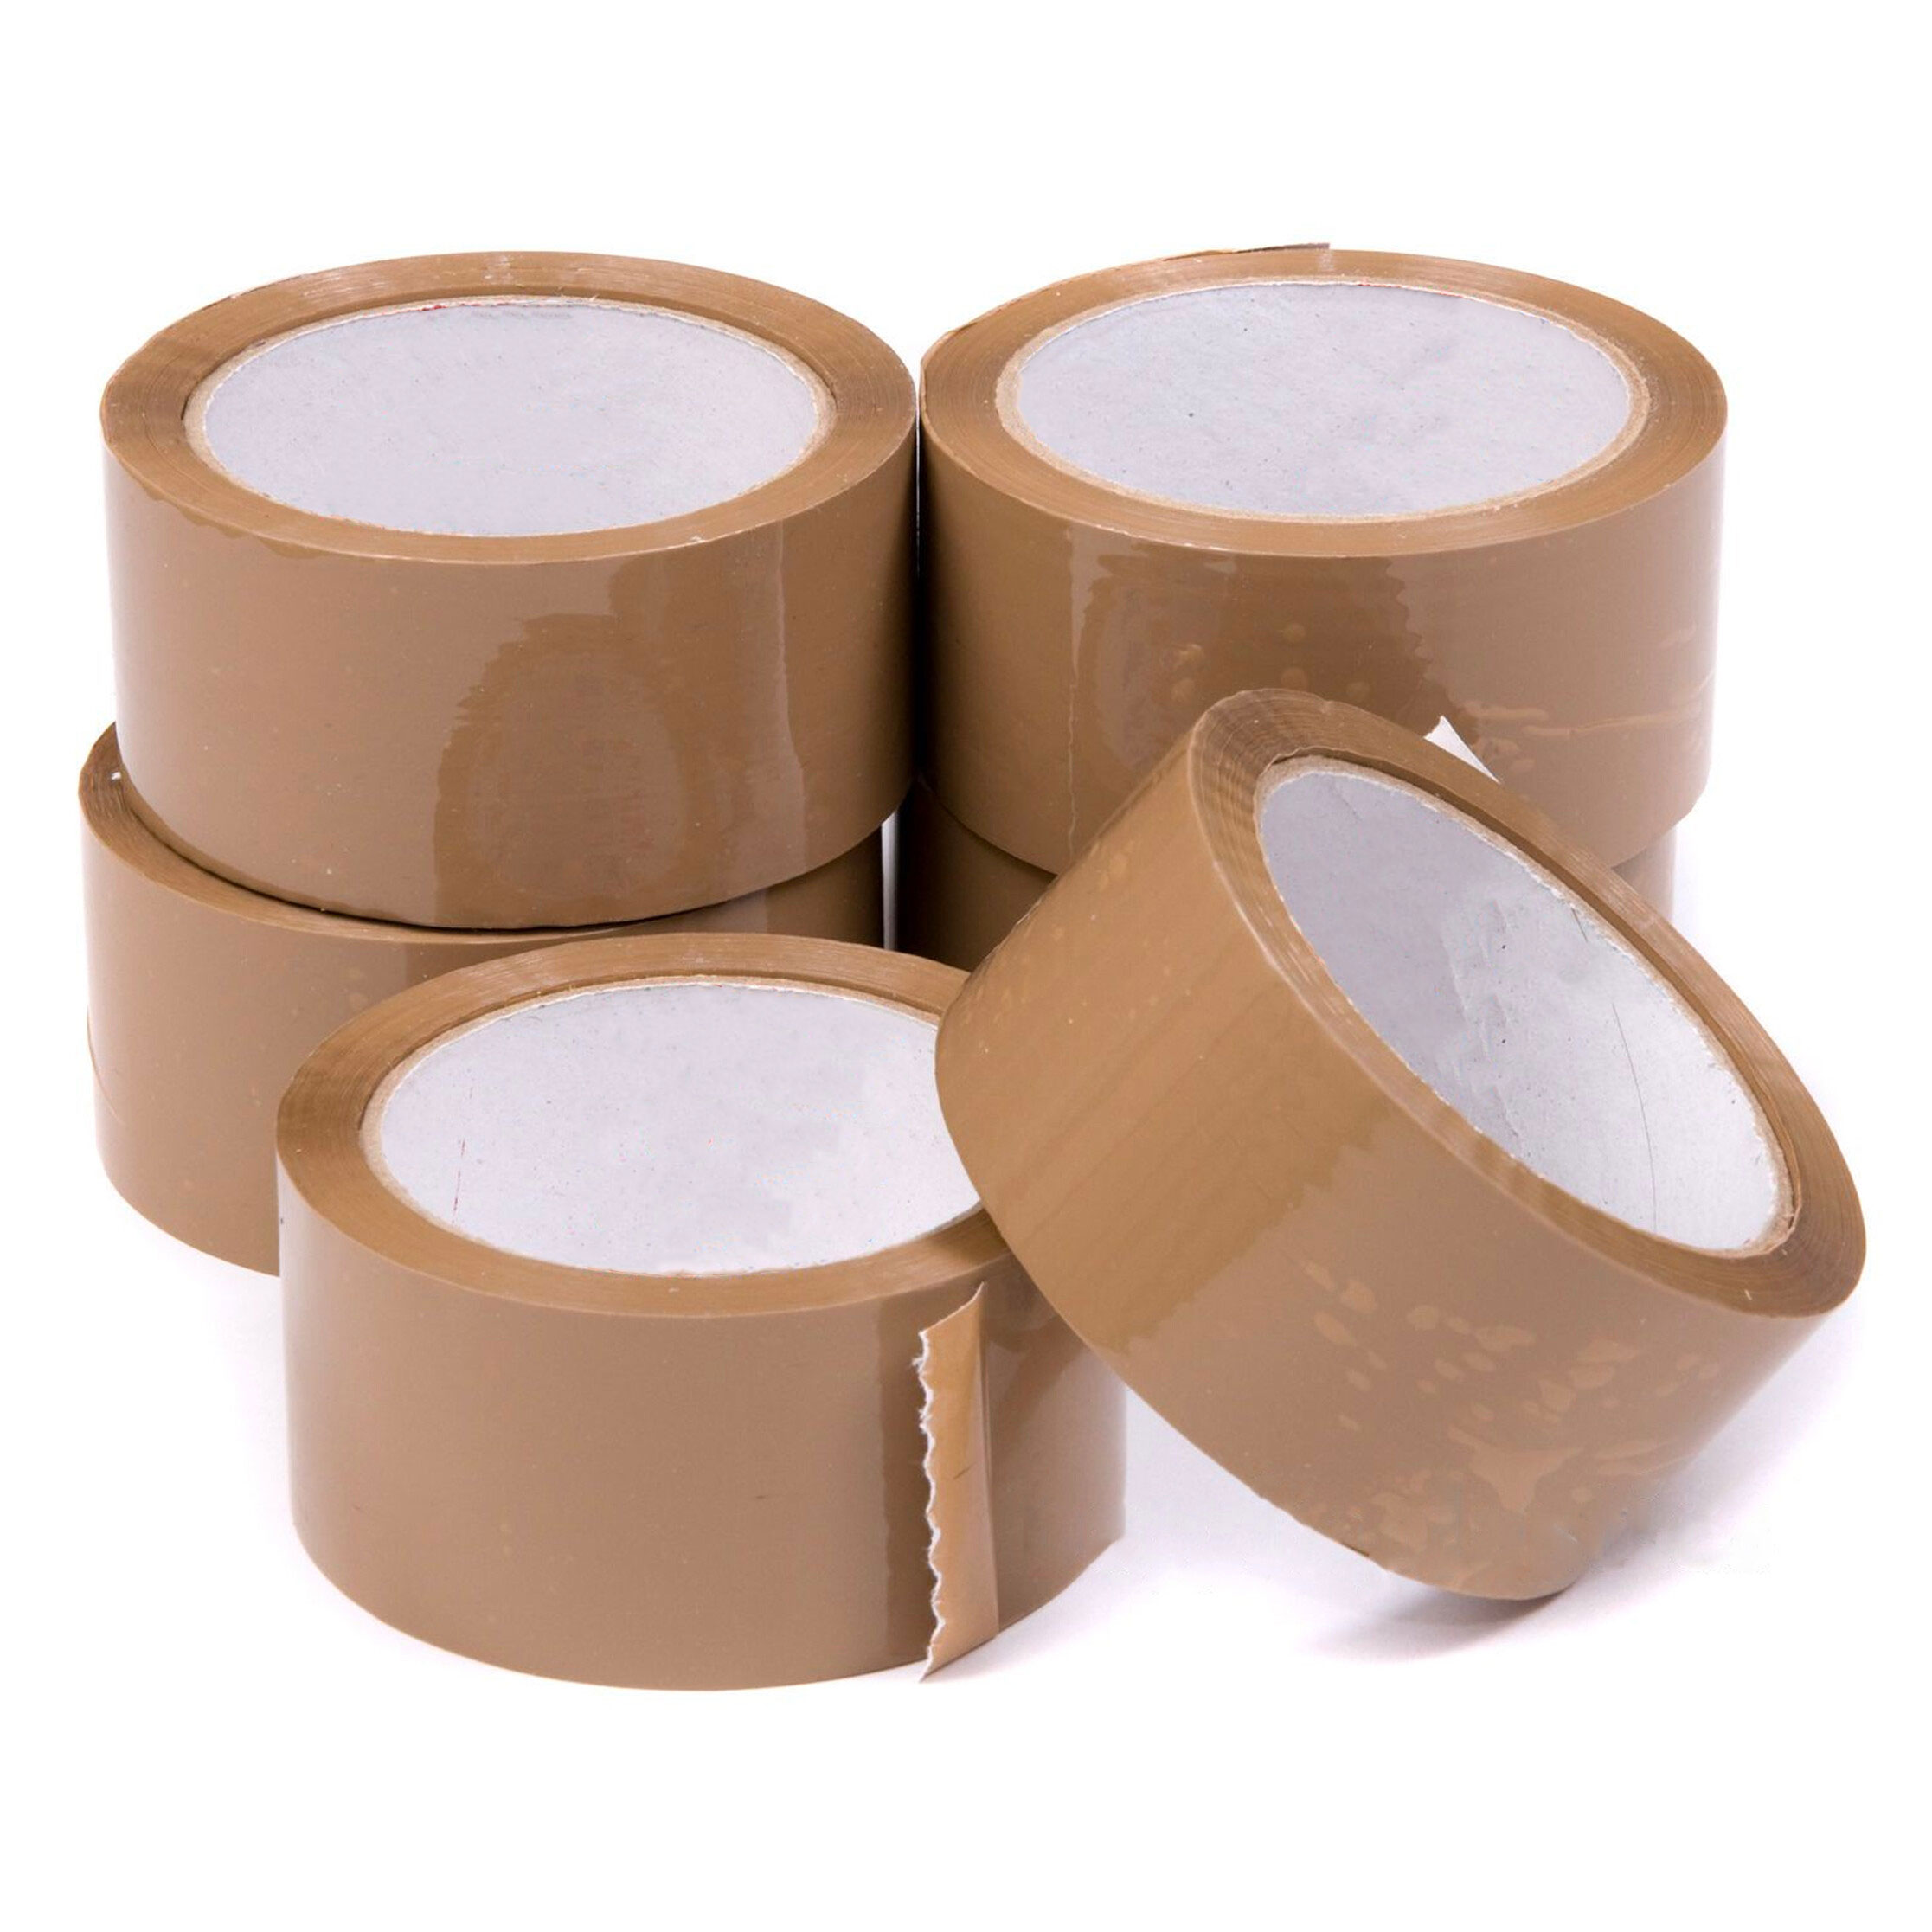 20 CLEAR STRONG PARCEL SEALING PACKAGING PACKING TAPE ROLLS 48MM x 66M SELLOTAPE 